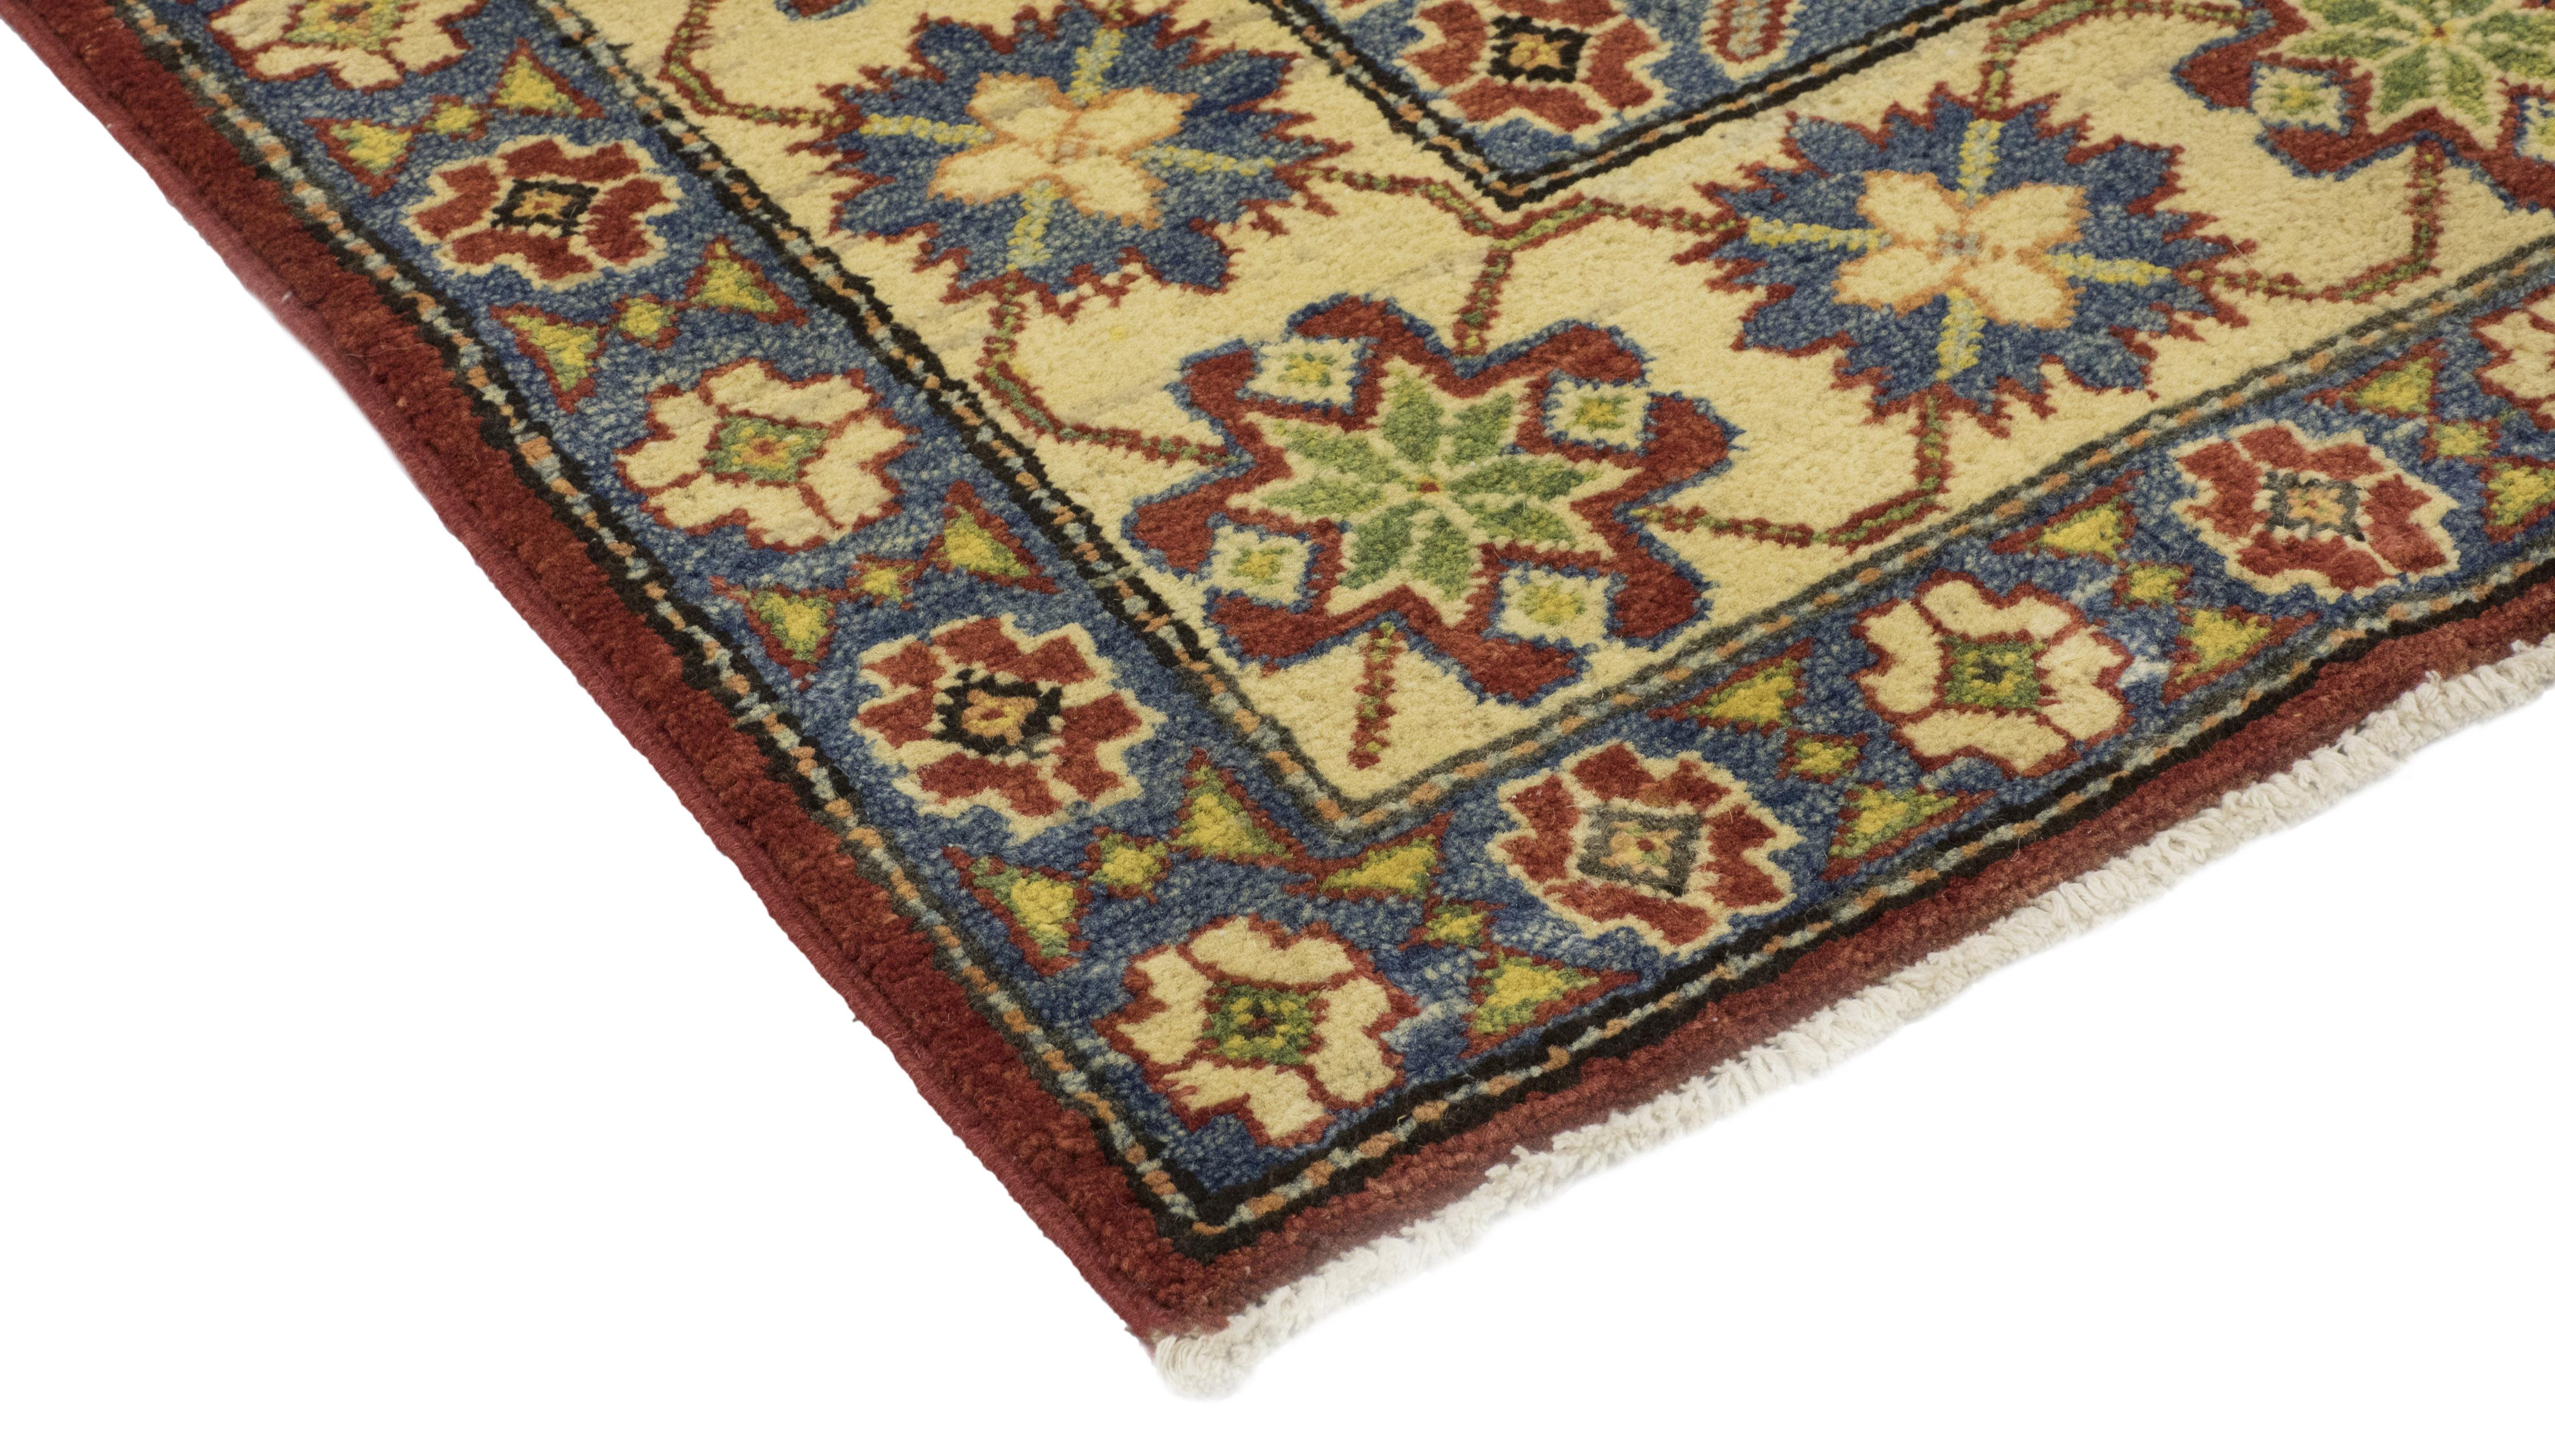 Color: Red, made in Pakistan. 100% wool. With their earthy palettes and geometric patterns, the hand knotted rugs of the Southwestern collection make beautiful additions to rustic and lodge-style rooms. At the same time, they contribute a sense of